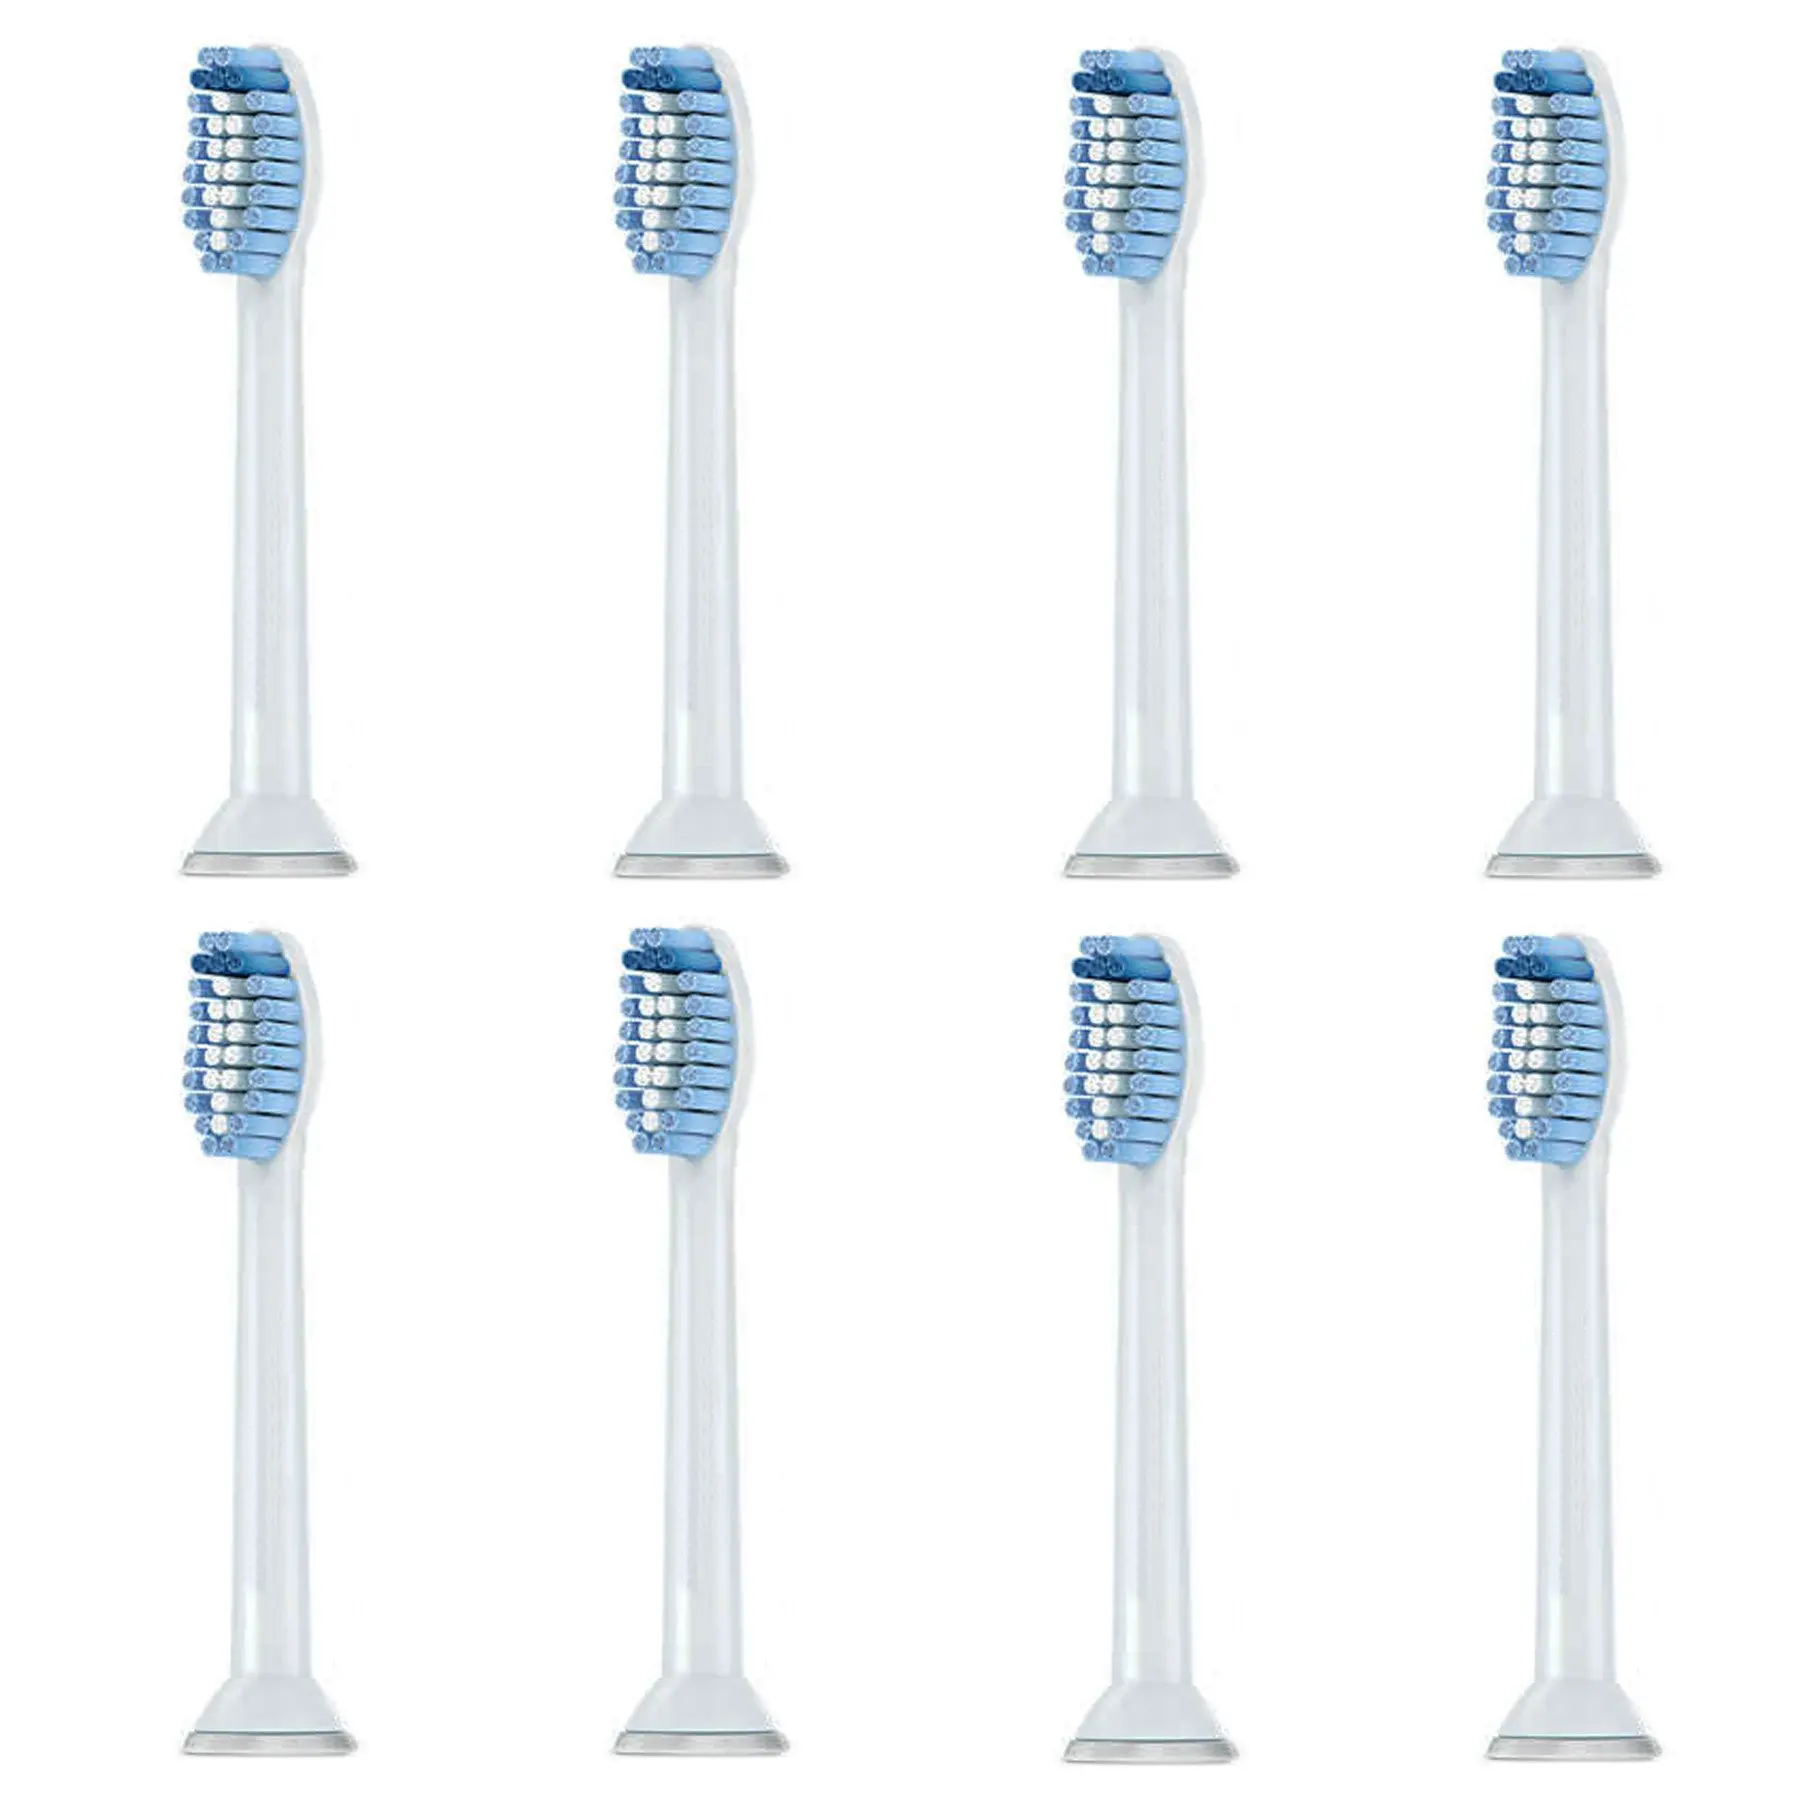 sonicare powerup replacement heads